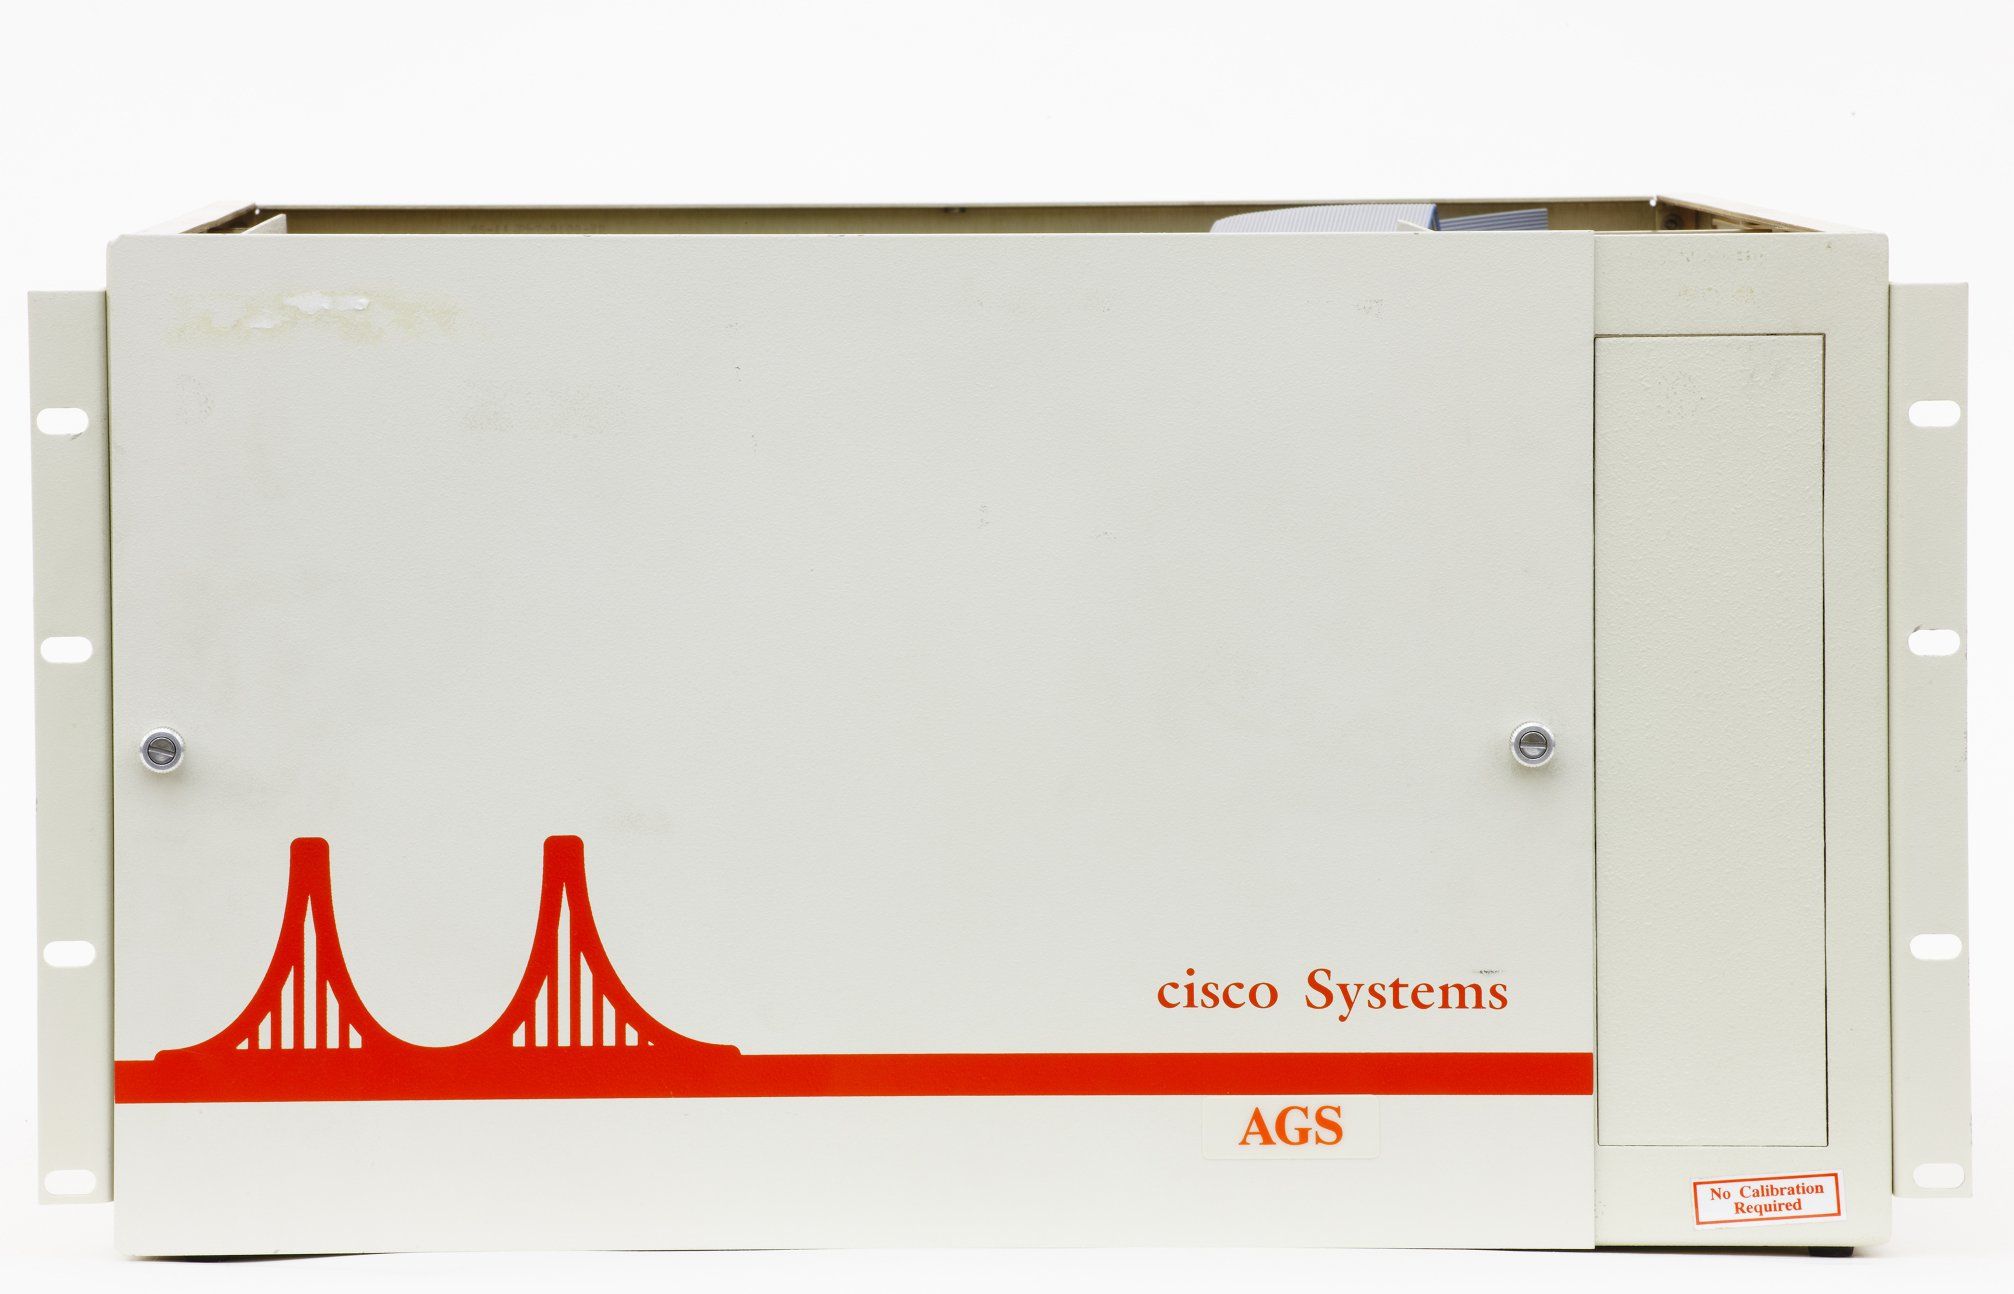 A front shot of the Cisco AGS chassis, a beige metal router with orange-red label in the shape of the first logo bridge and the company name